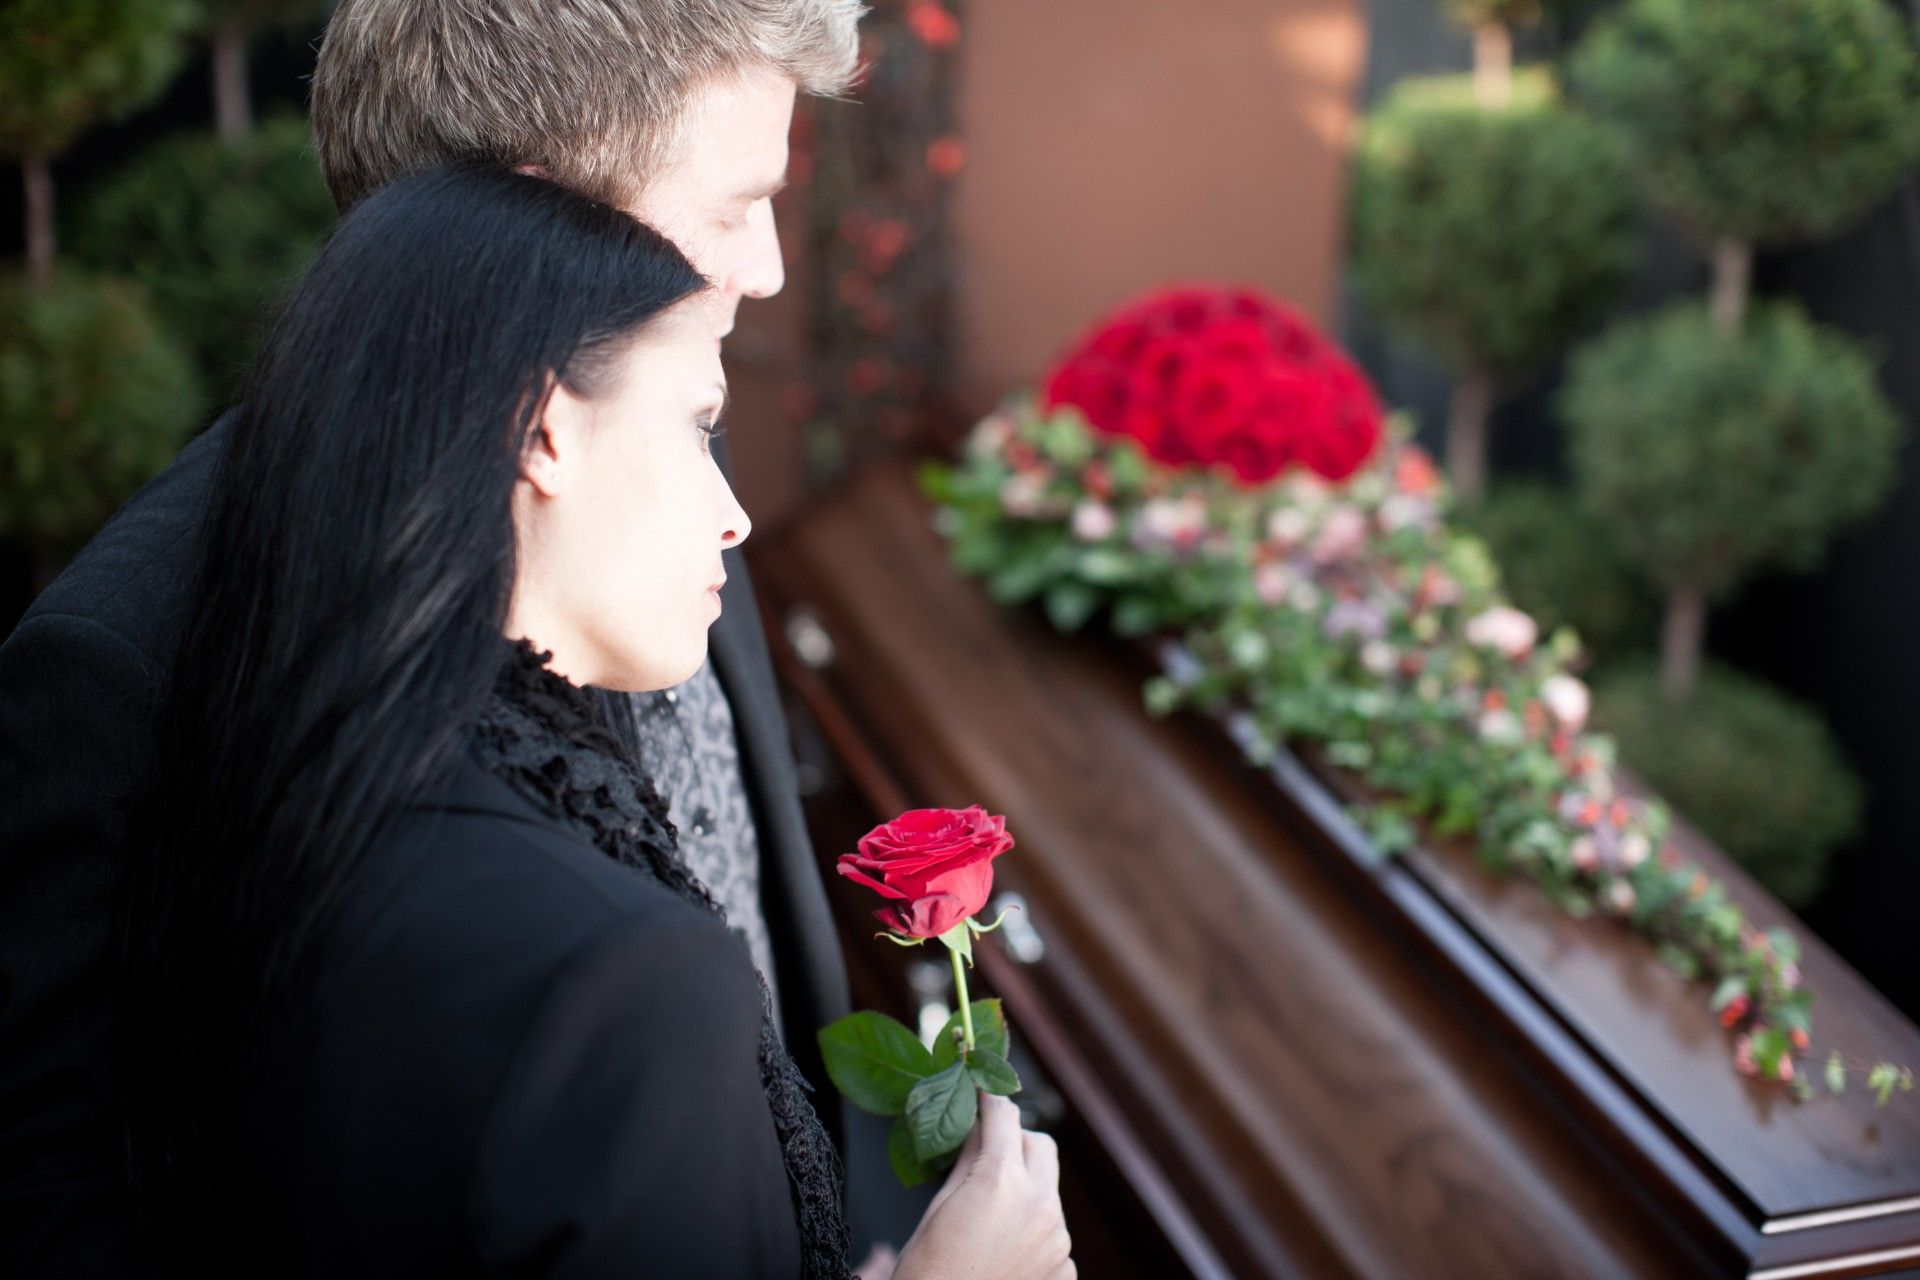 Mourners stand near a brown casket with red roses on top during a funeral - funeral costs